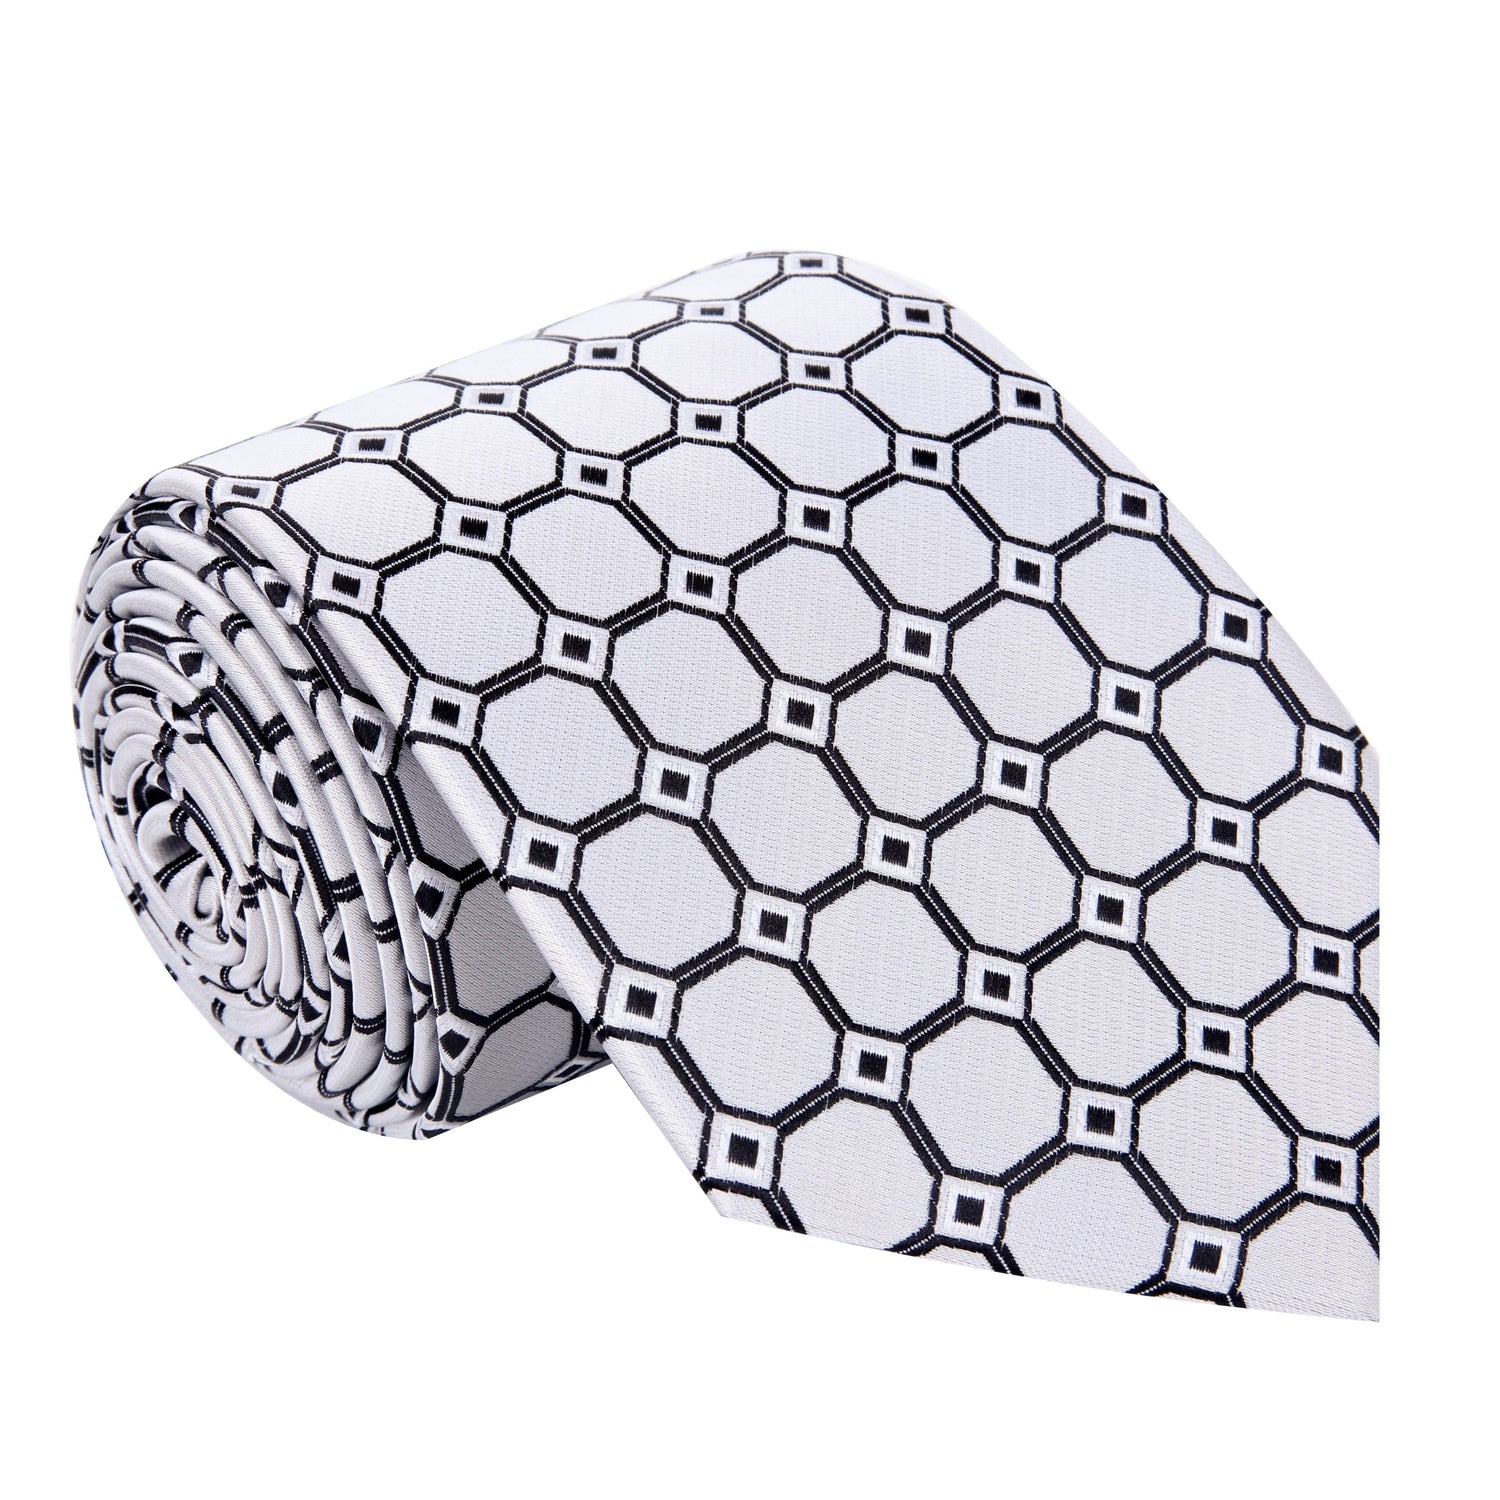 An Icy Silver, White, Black Geometric Squares With Small Diamonds Pattern Silk Necktie, 